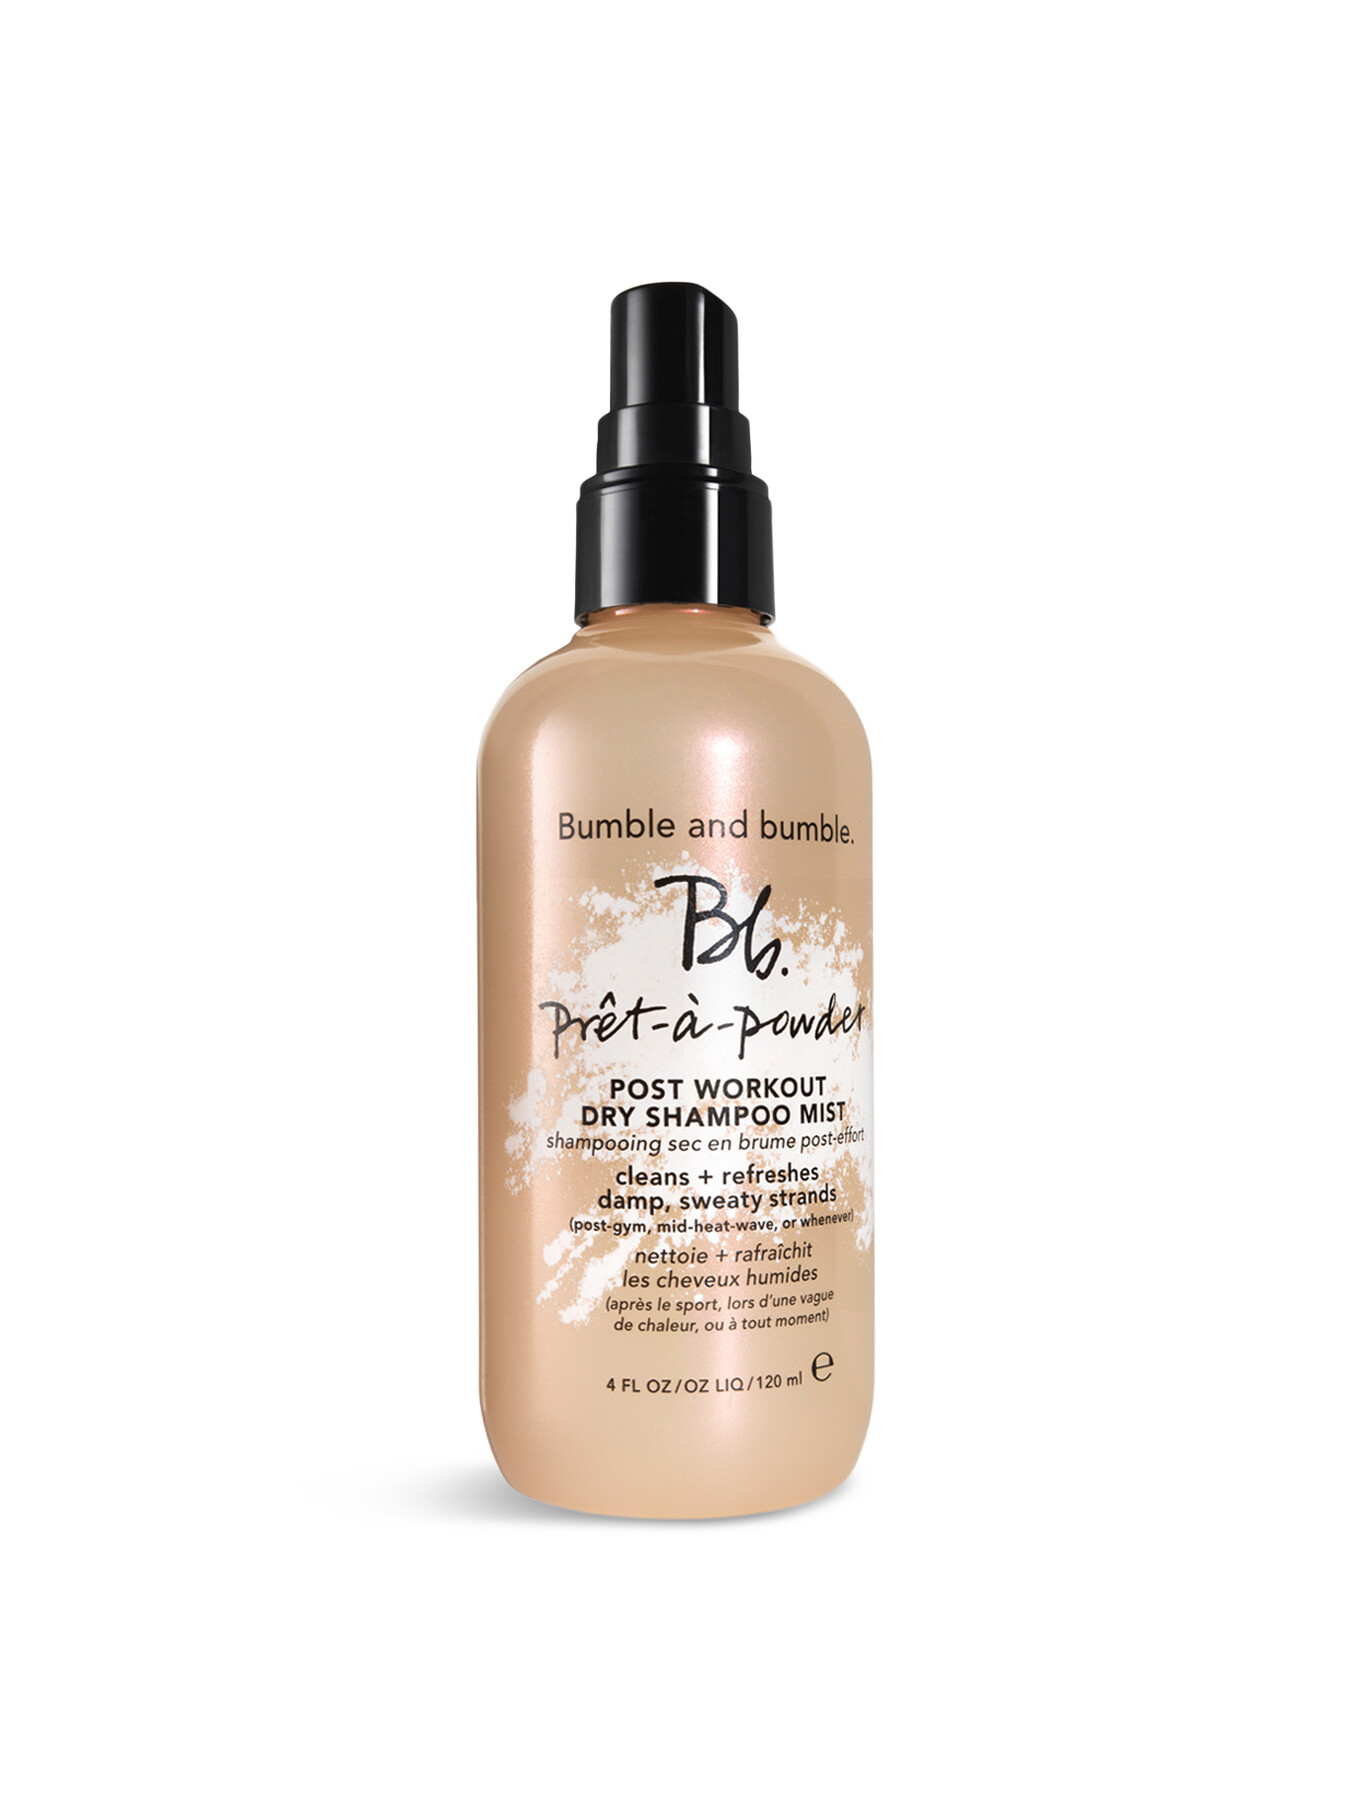 Bumble And Bumble Pret A Powder Post Workout Dry Shampoo Mist 120ml